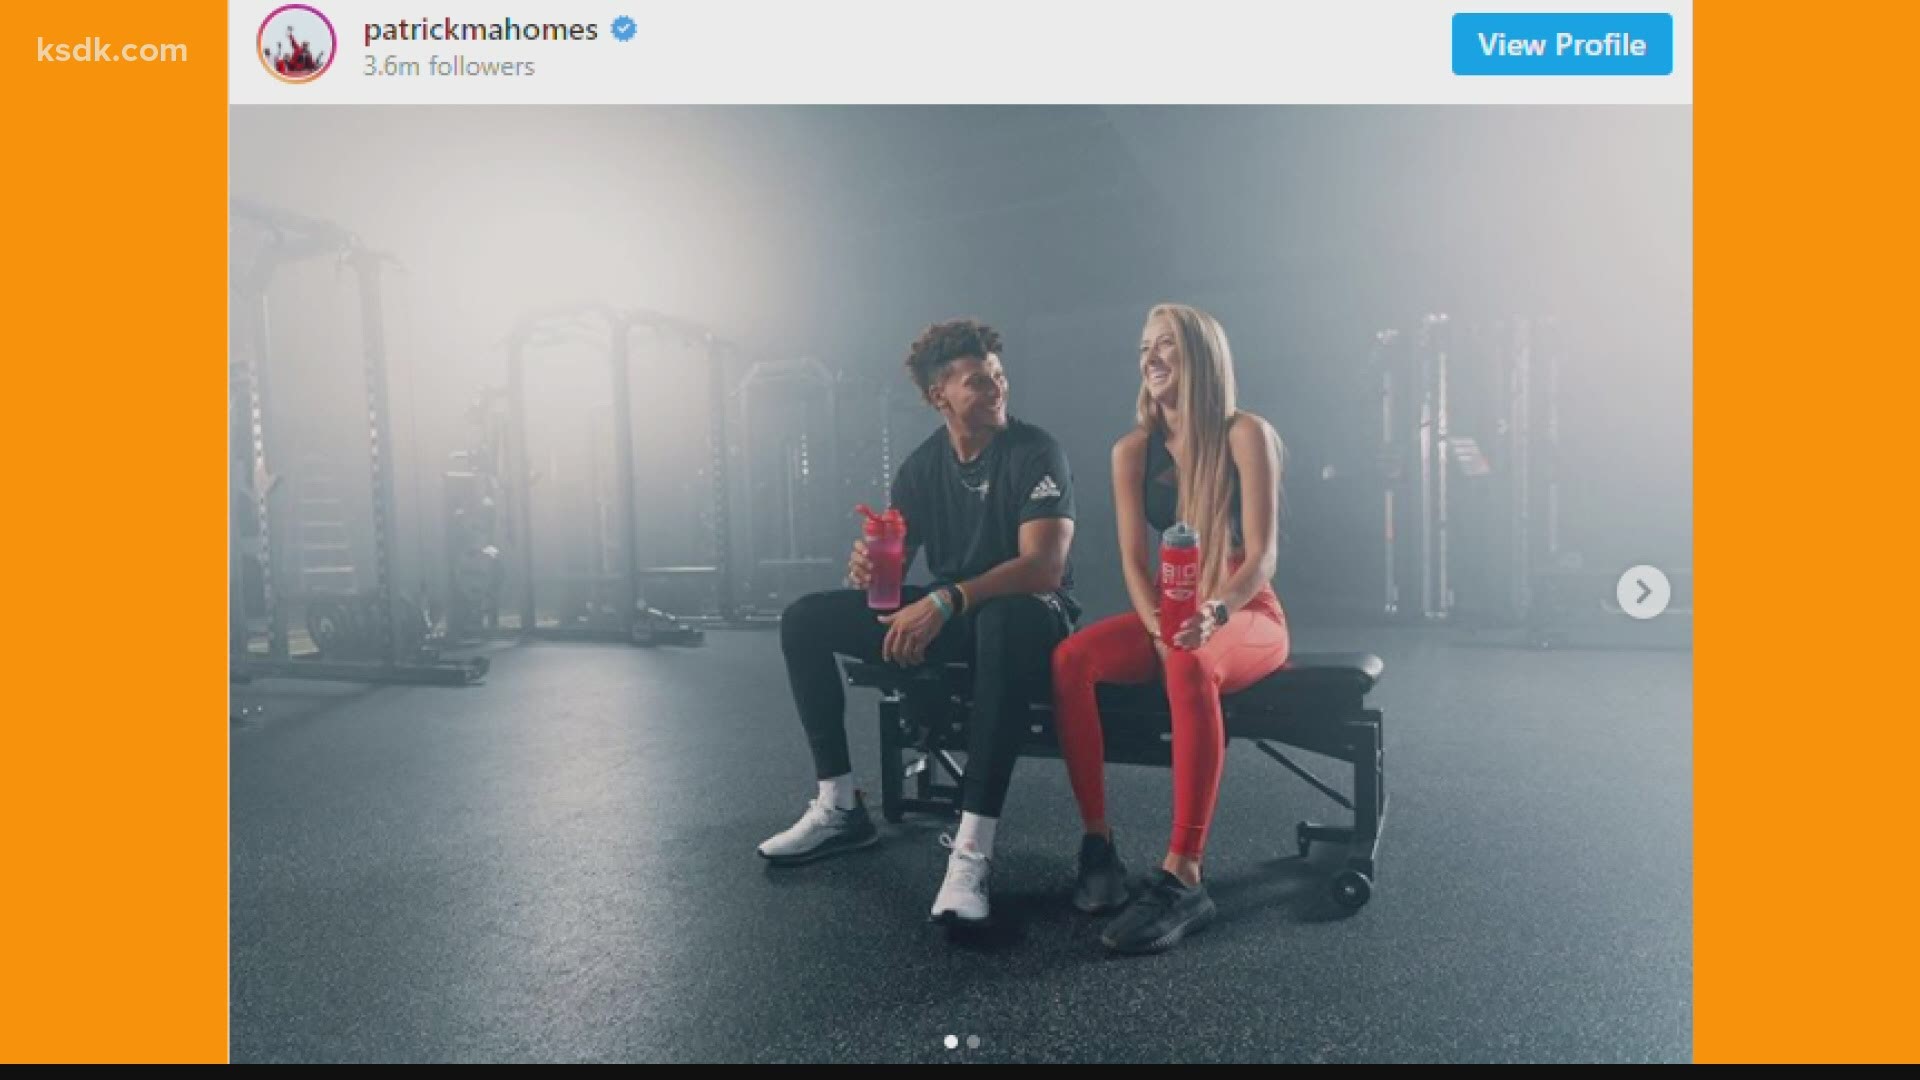 Mahomes proposed to his high school sweetheart earlier this month